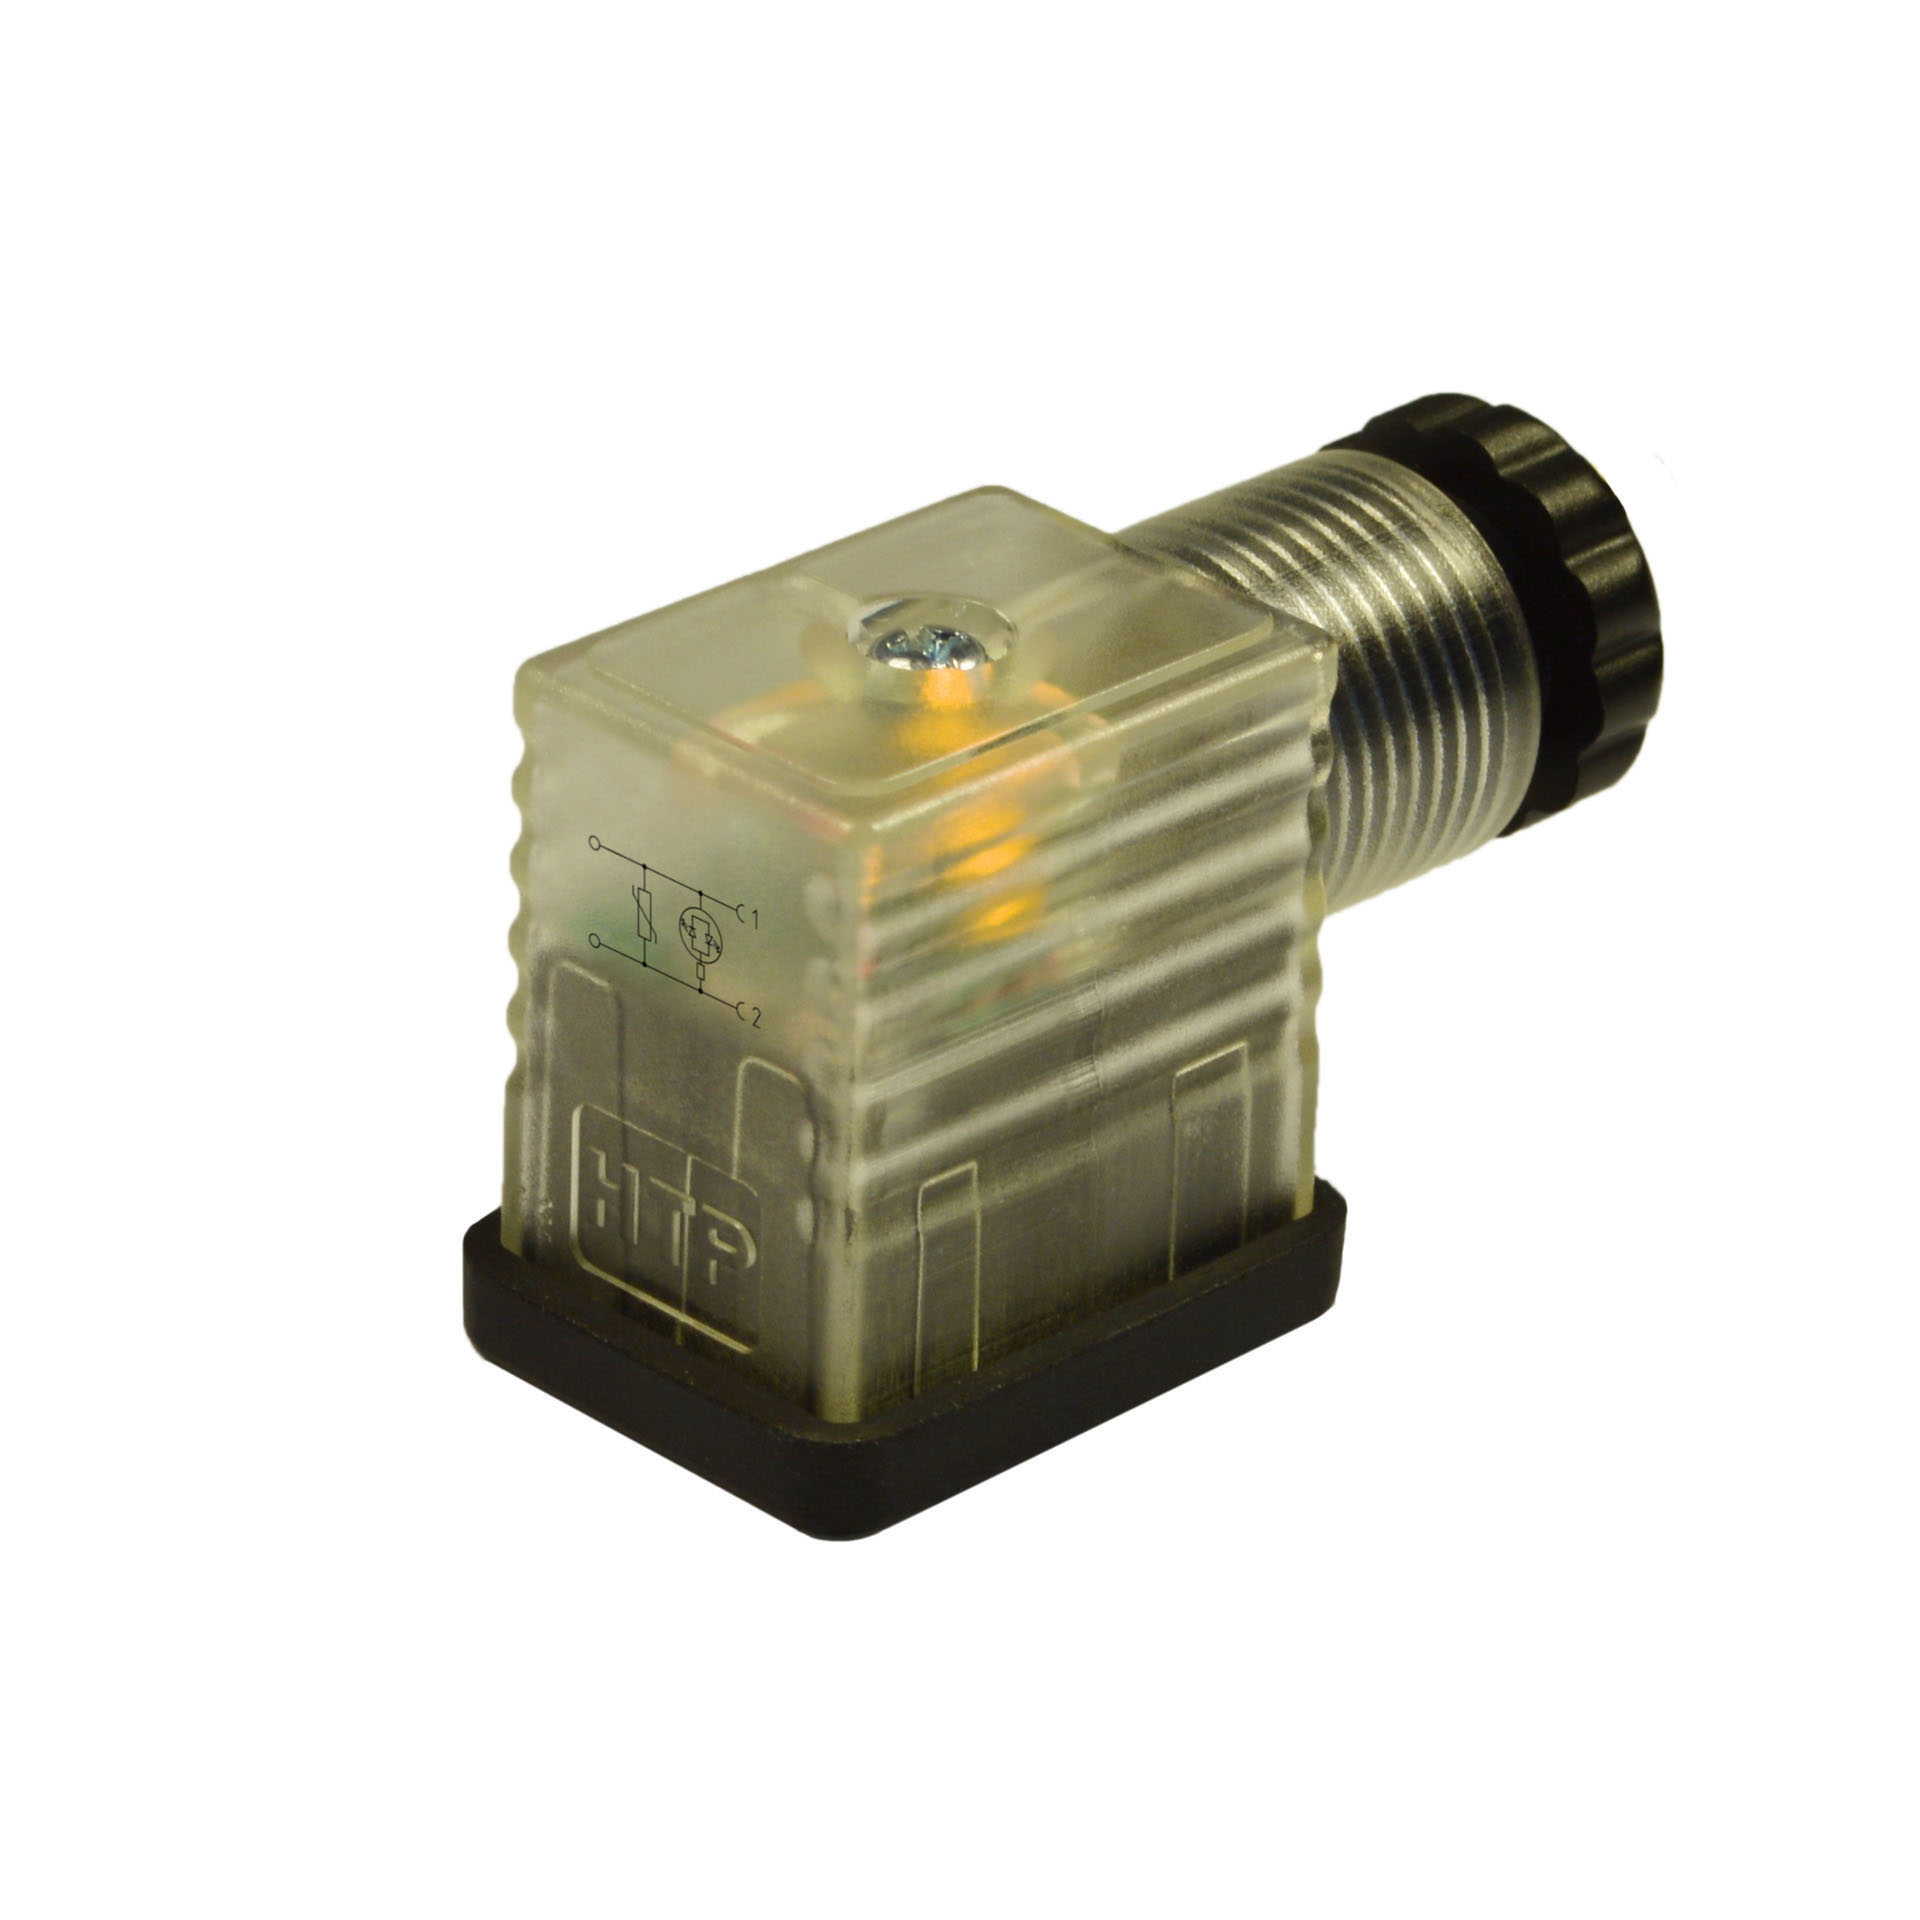 Industriale/B a cablare,2p+T(h.12),LED giallo+vdr,24VAC/DC,PG9